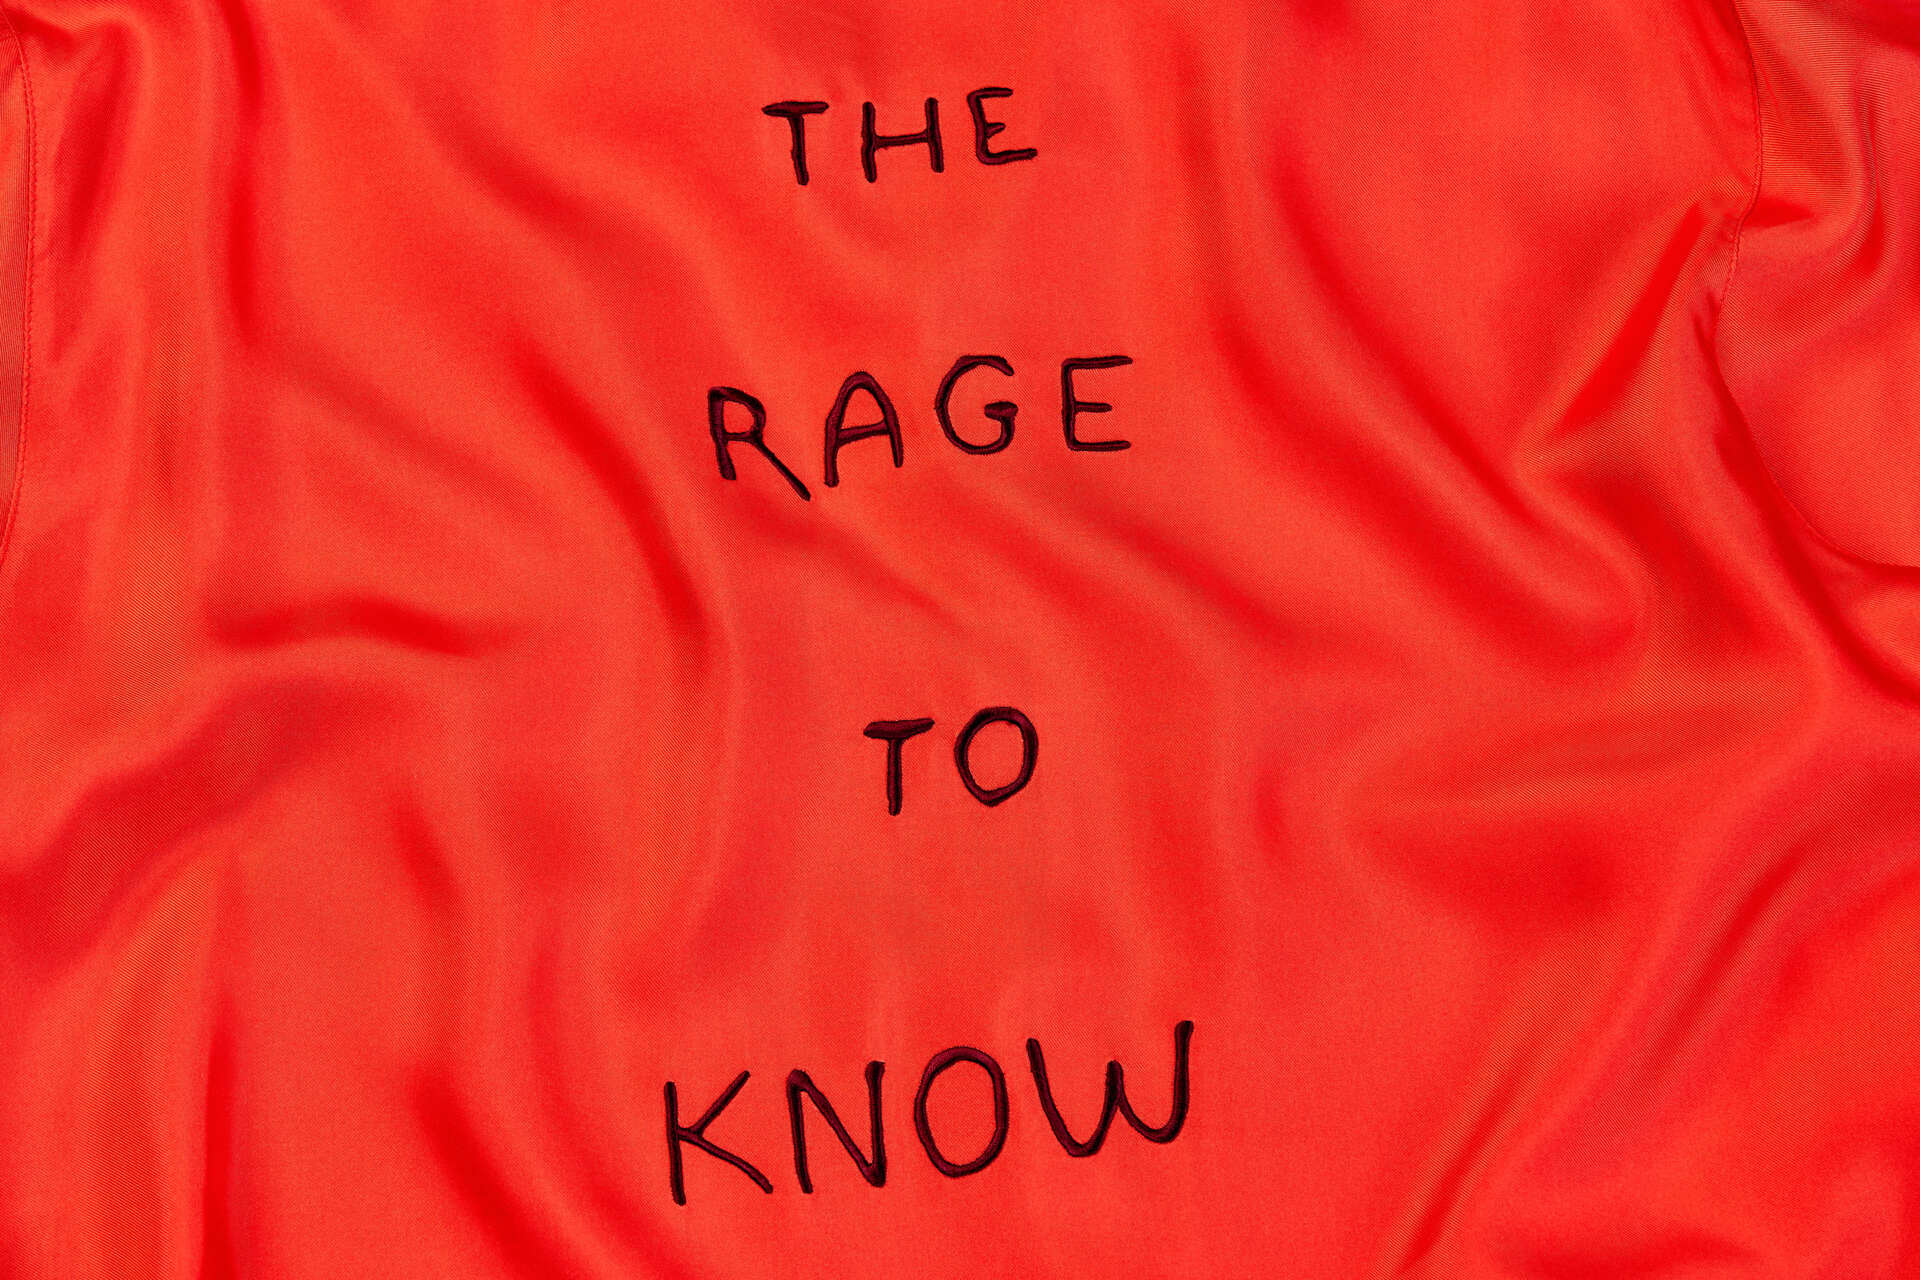 THE RAGE TO KNOW © 2022 Jenny Holzer, member Artist Rights Society (ARS)